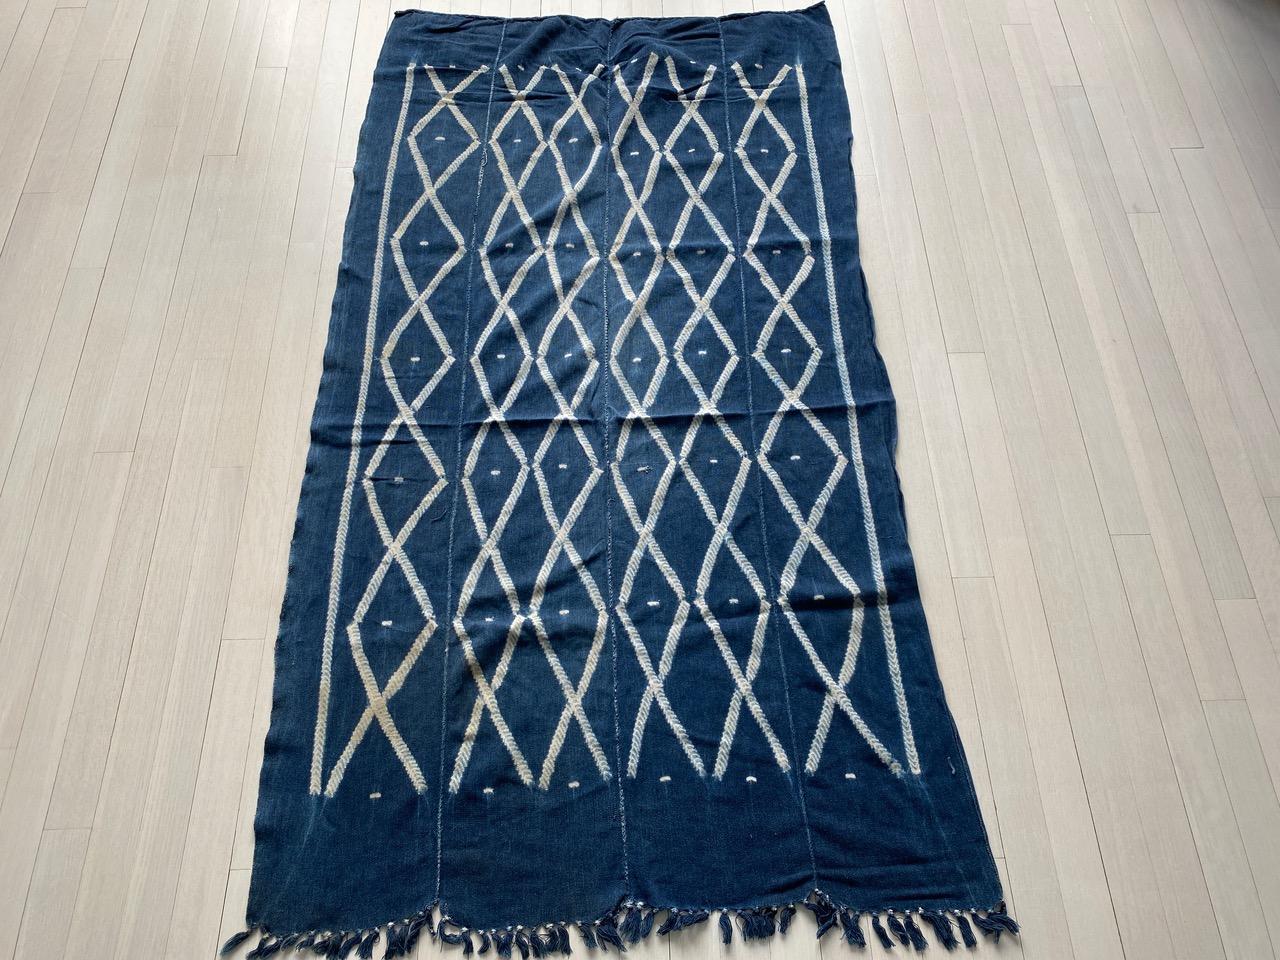 African Mali tribal textile circa 1950. Handwoven, vegetable dyed cotton. We only select the best. 

This soft textile was sourced in the spirit of Wabi-Sabi, a Japanese philosophy that beauty can be found in imperfection and impermanence. It is a